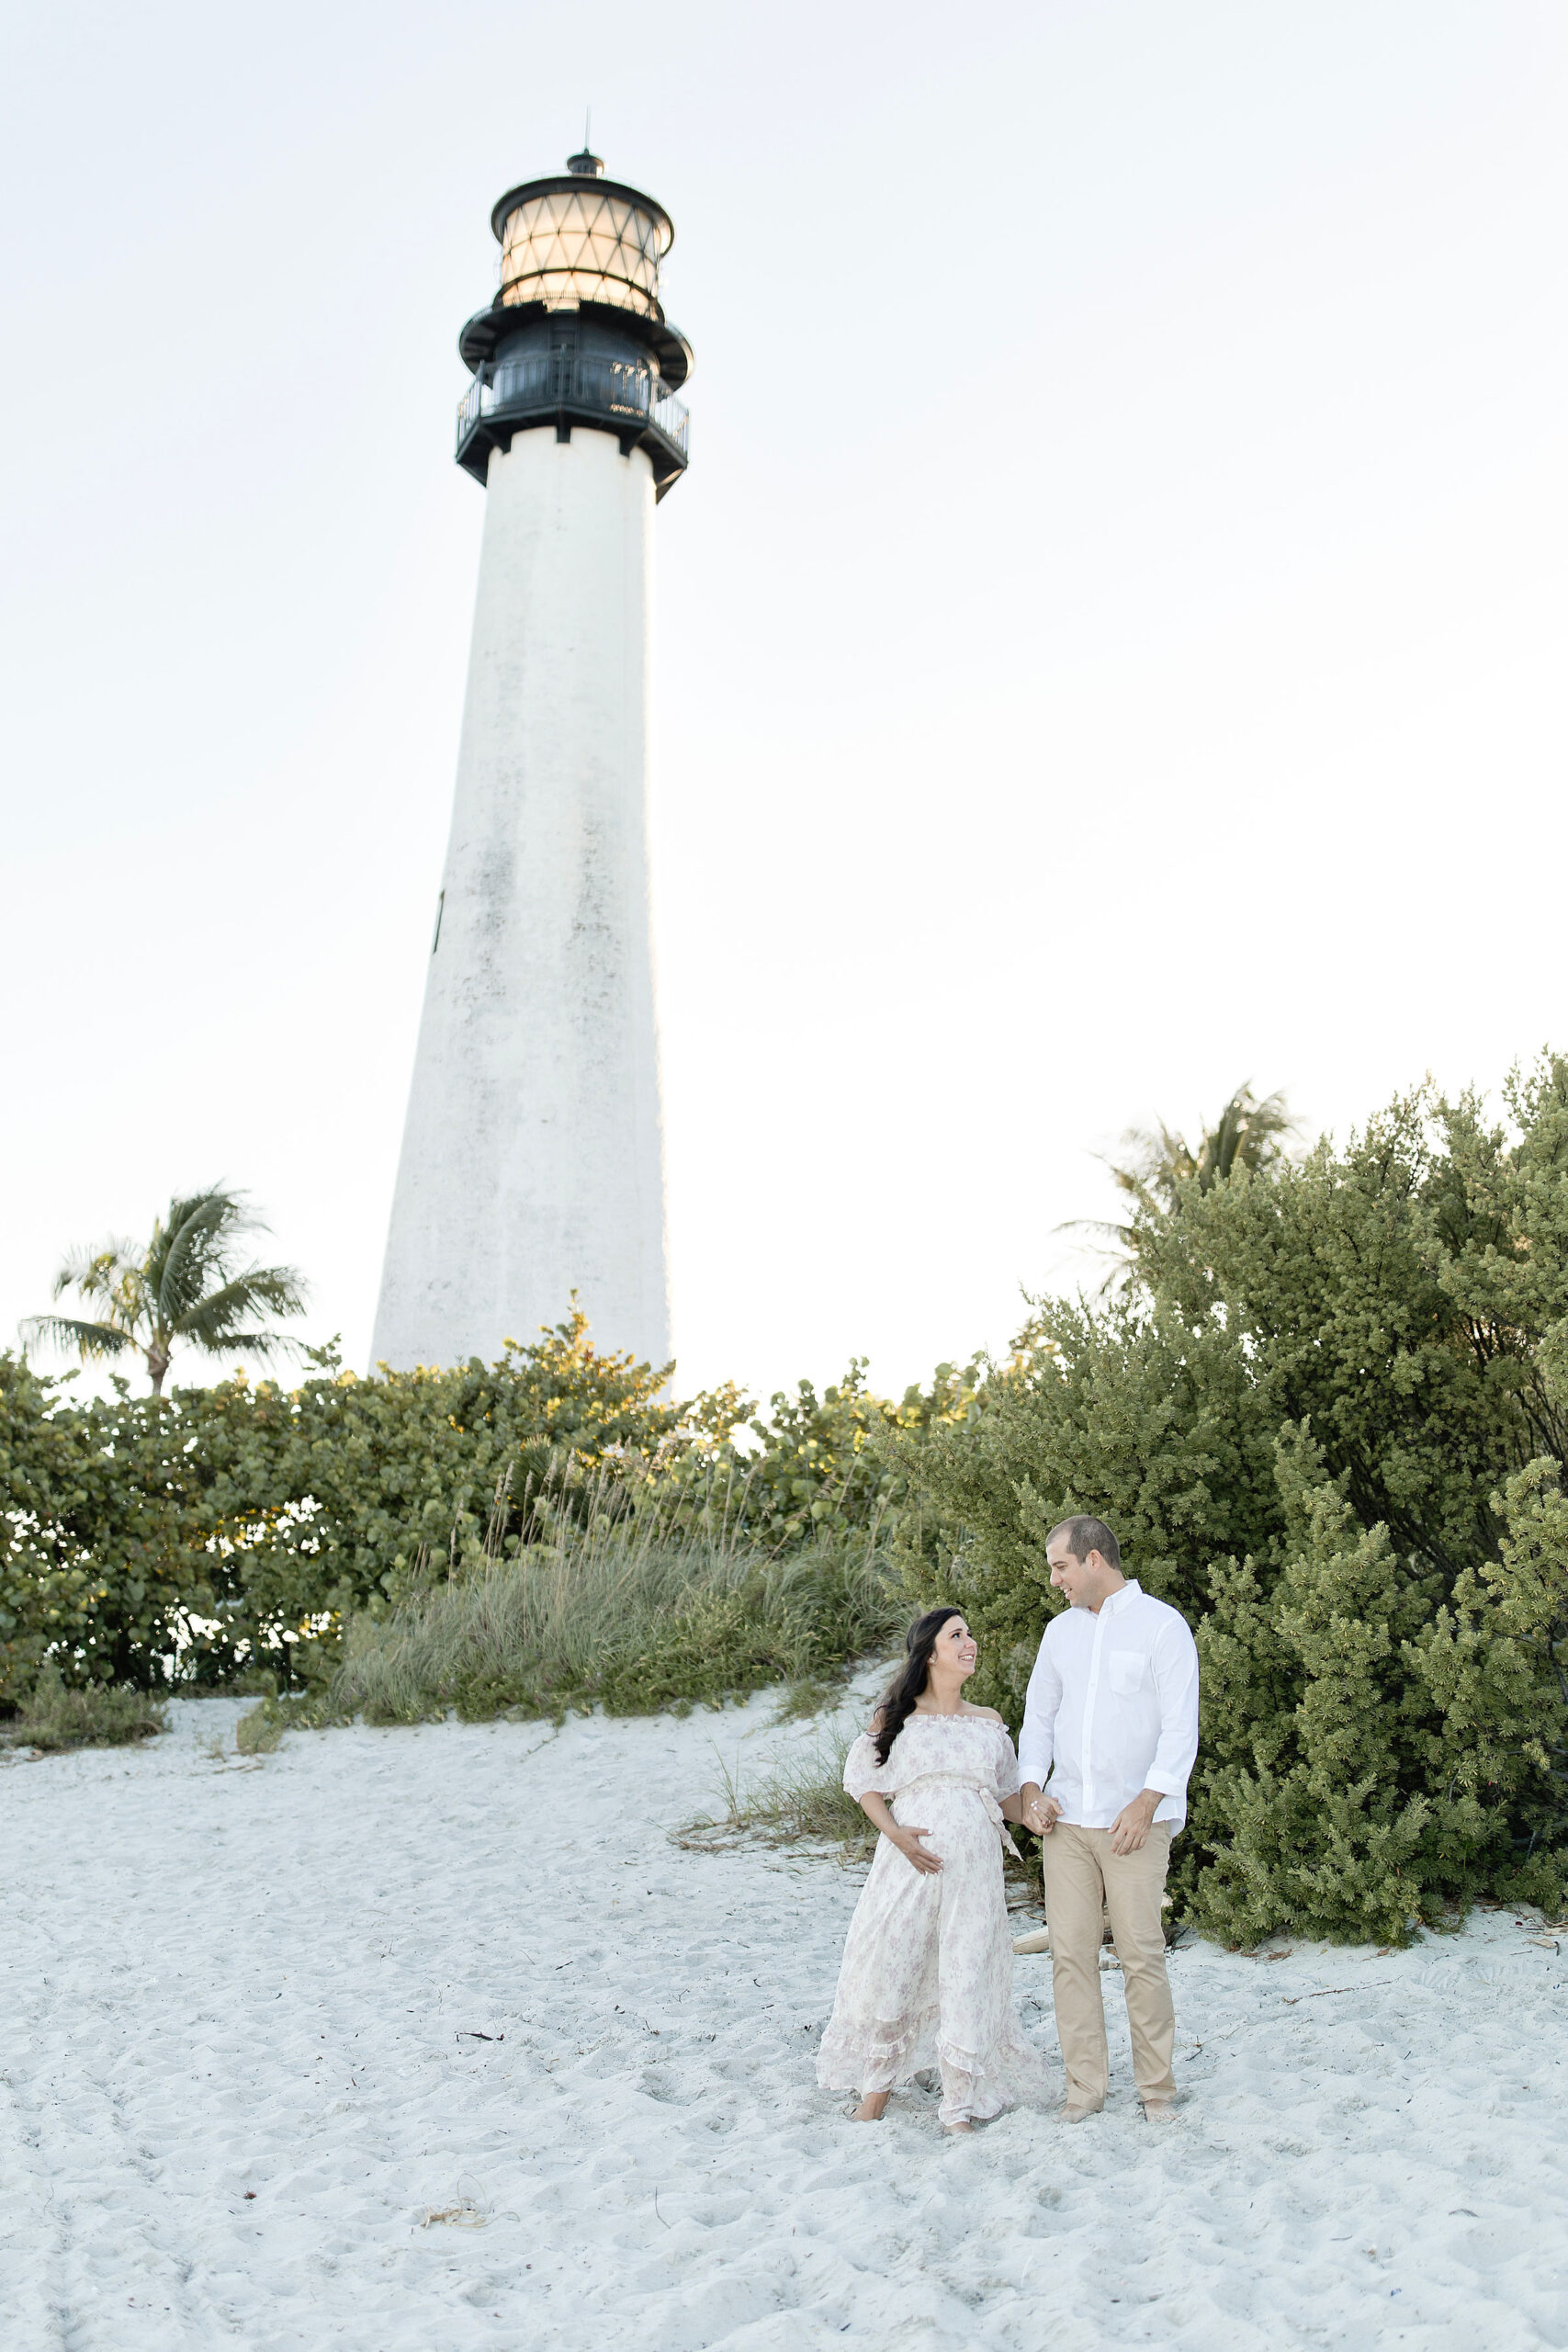 A mom to be in a white maternity dress walks through the dunes holding hands with her partner in a white shirt by a lighthouse at sunset